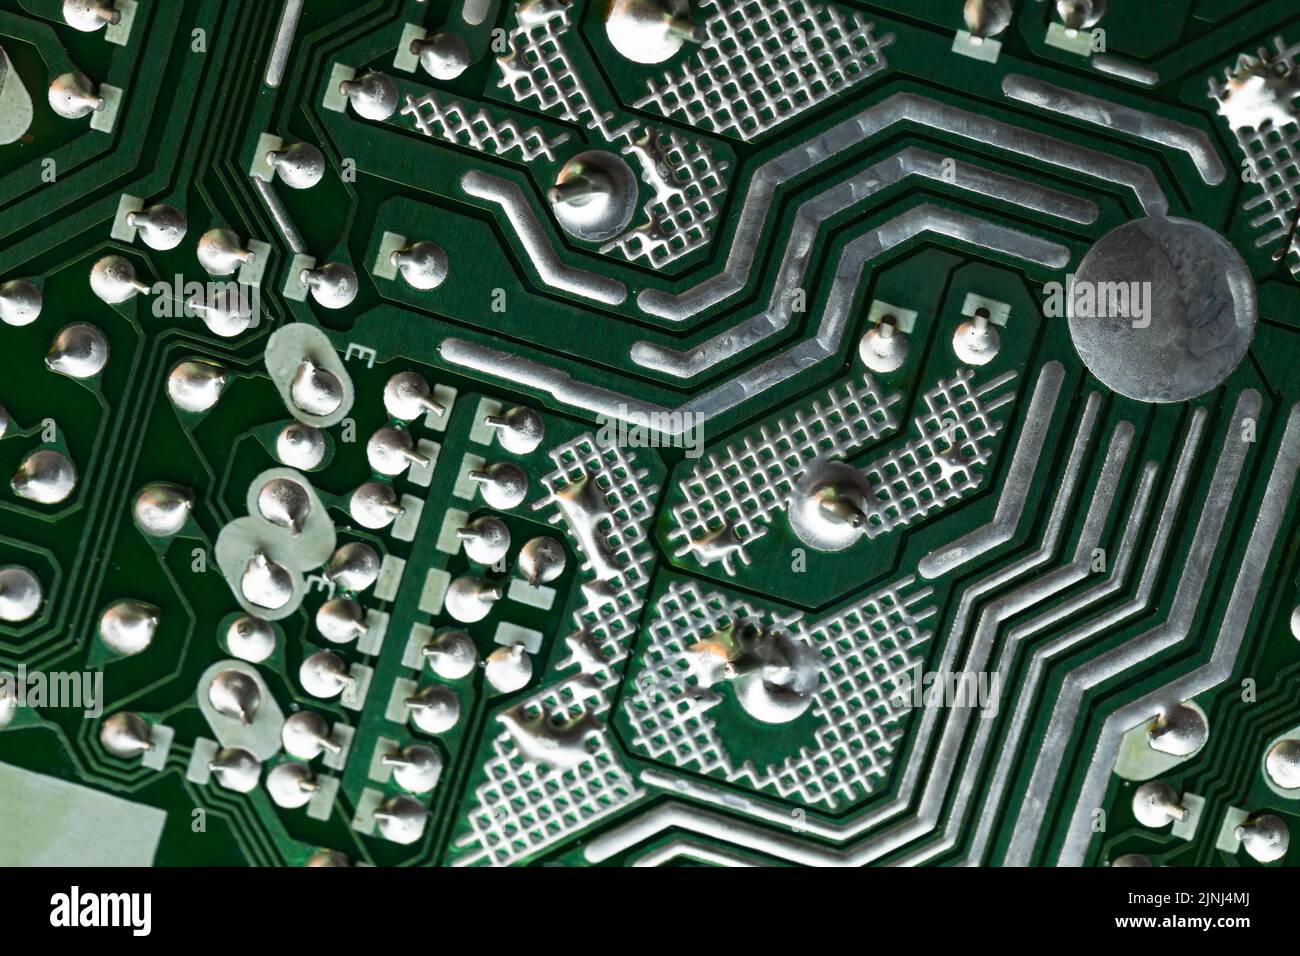 Abstract high-tech background with green printed circuit board, micro electronics component Stock Photo